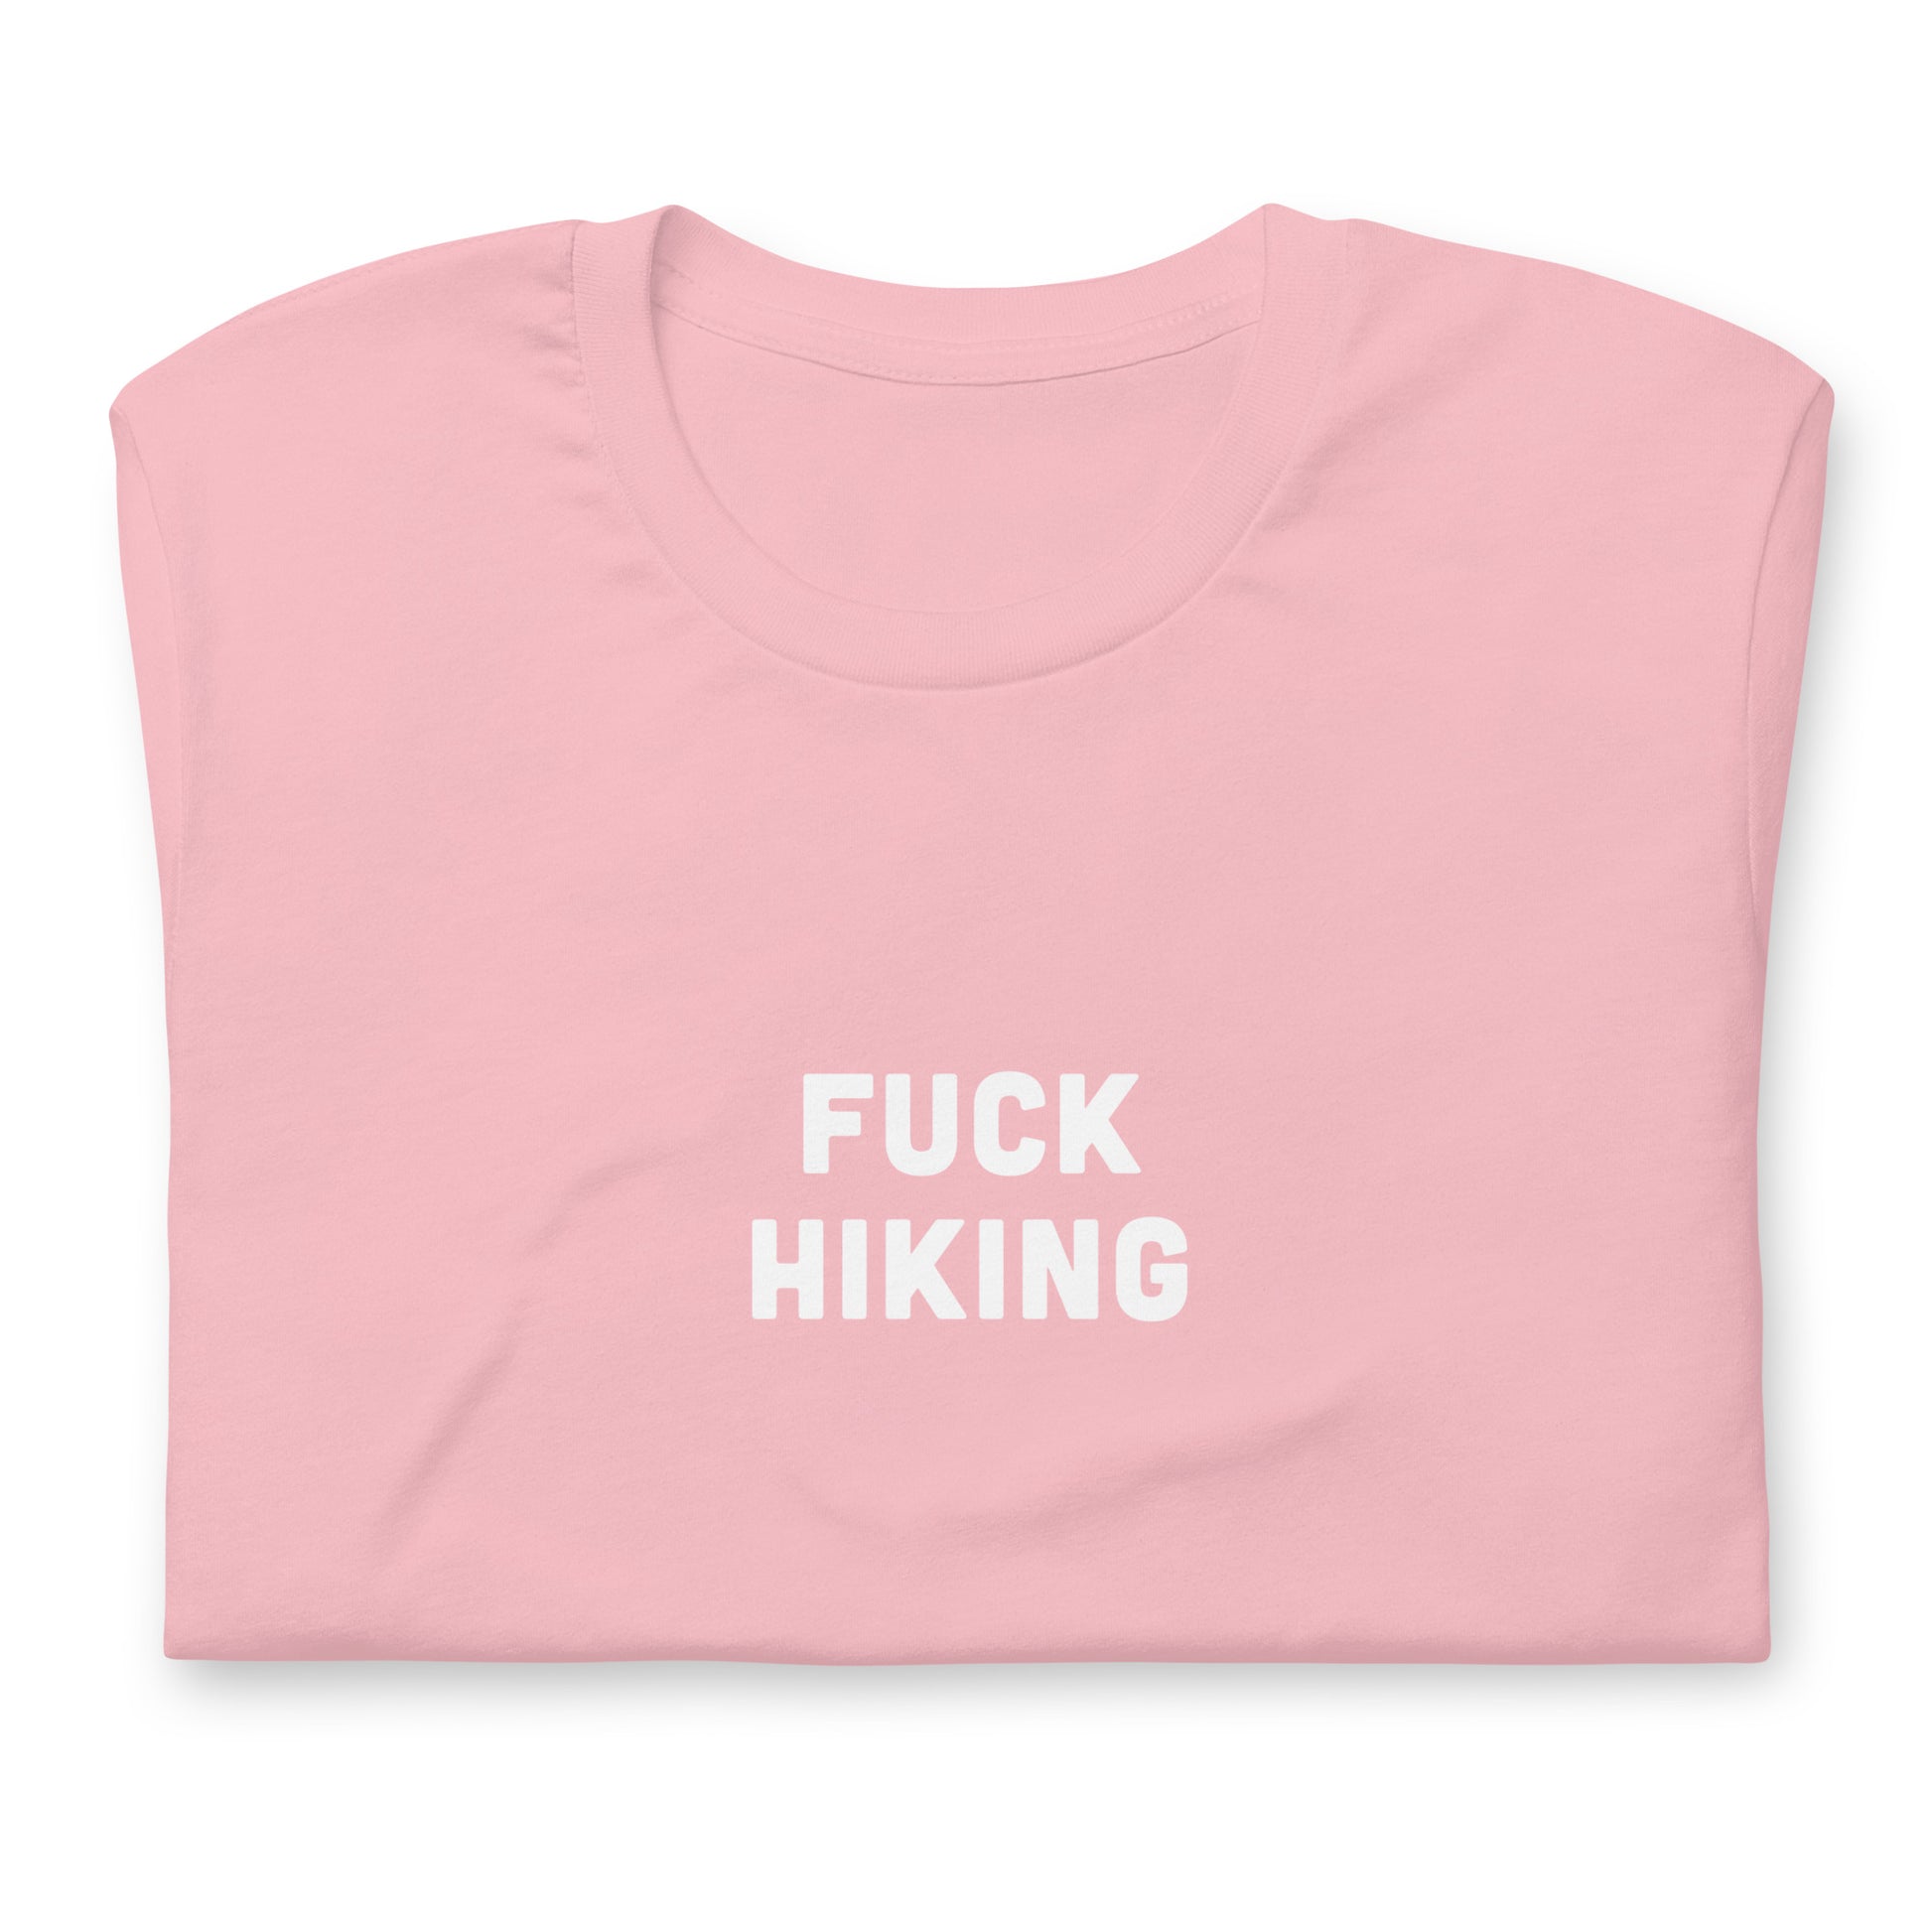 Fuck Hiking T-Shirt Size 2XL Color Forest